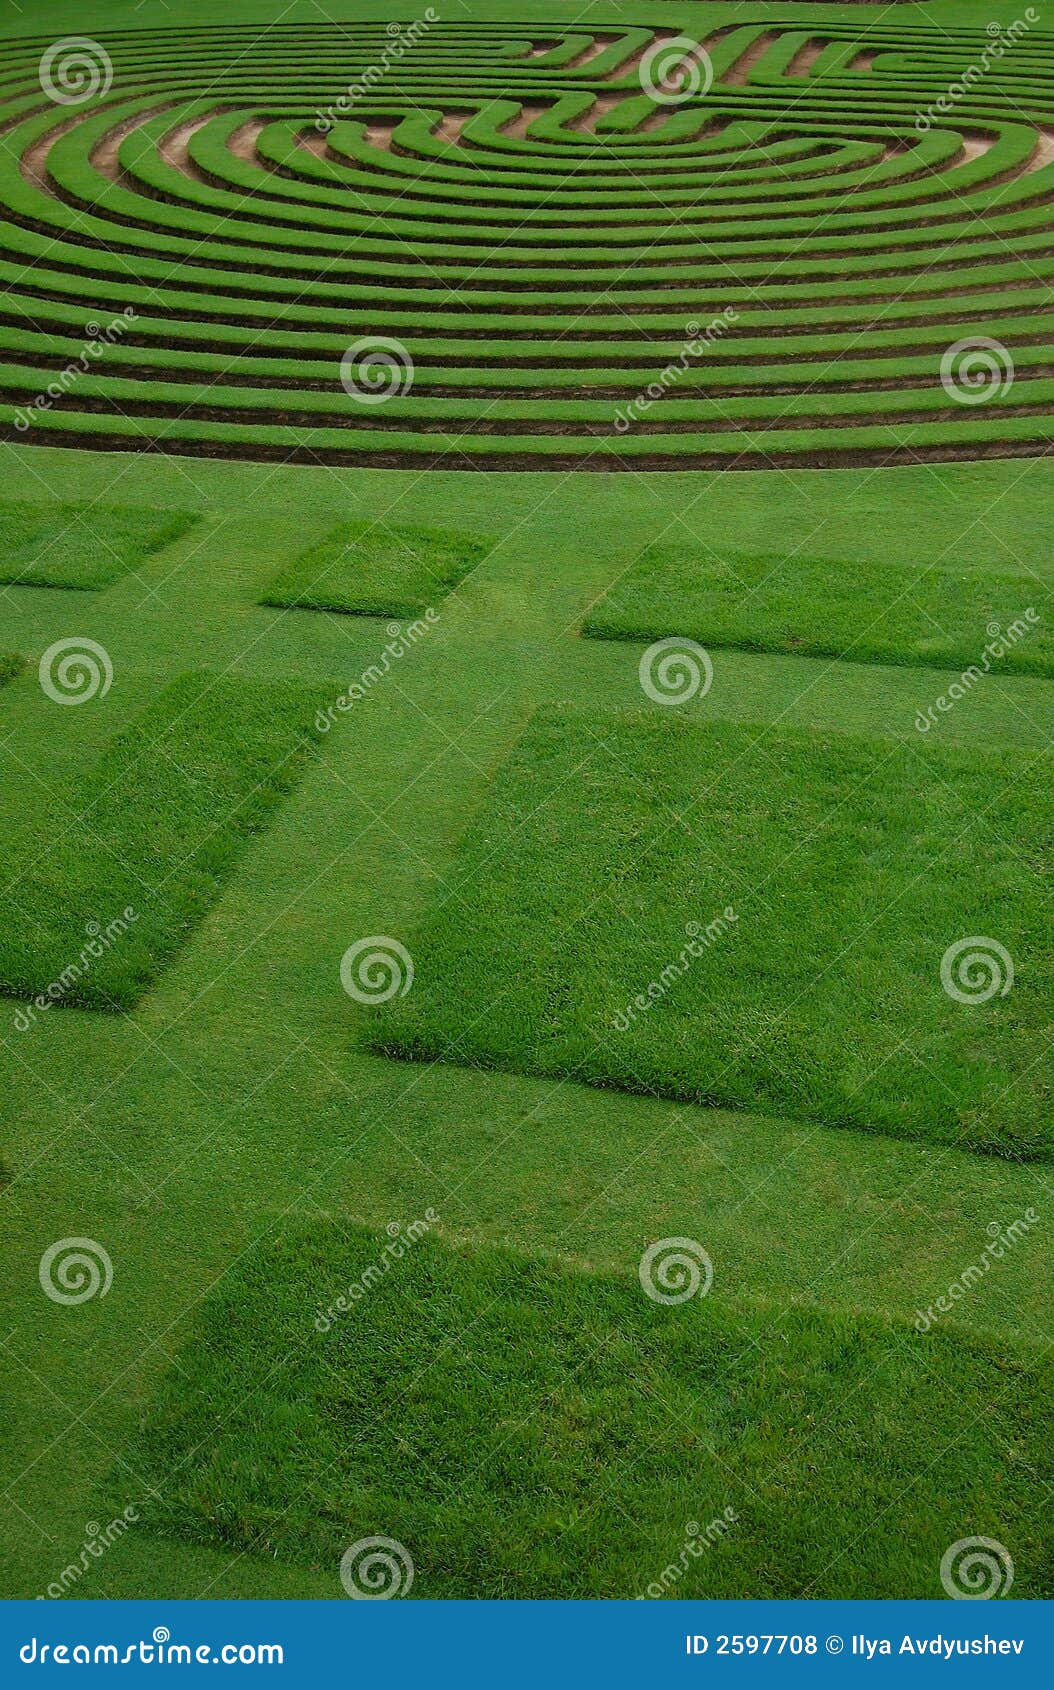 ably trimmed lawn